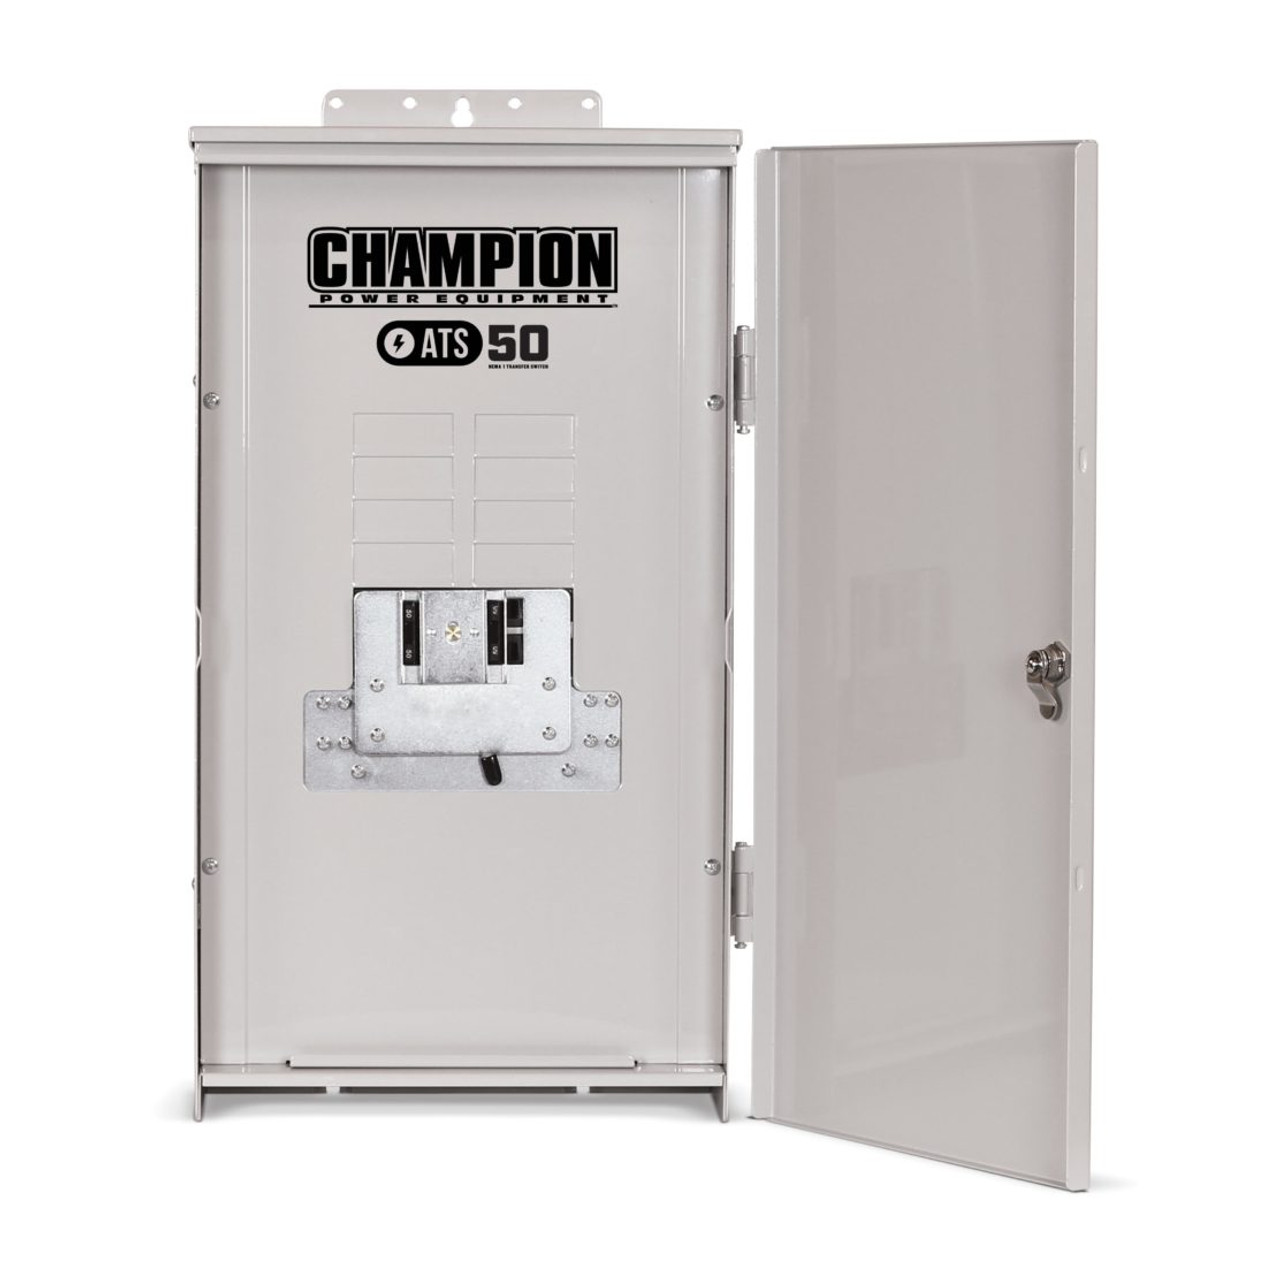 Champion 8.5-kW Home Standby Generator with 50-Amp Indoor Switch 100174